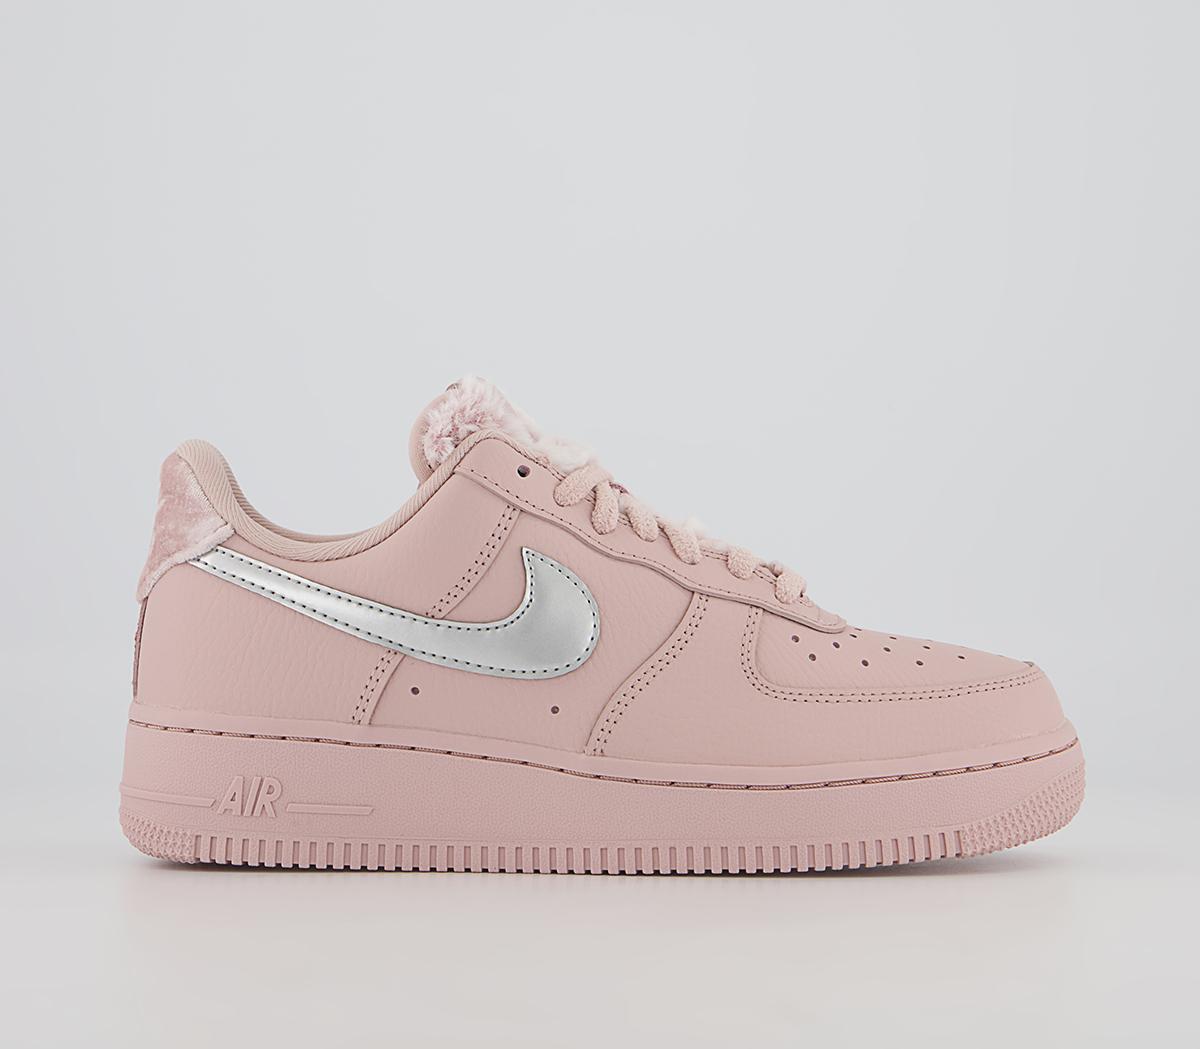 NikeAir Force 1 07 TrainersPink Oxford